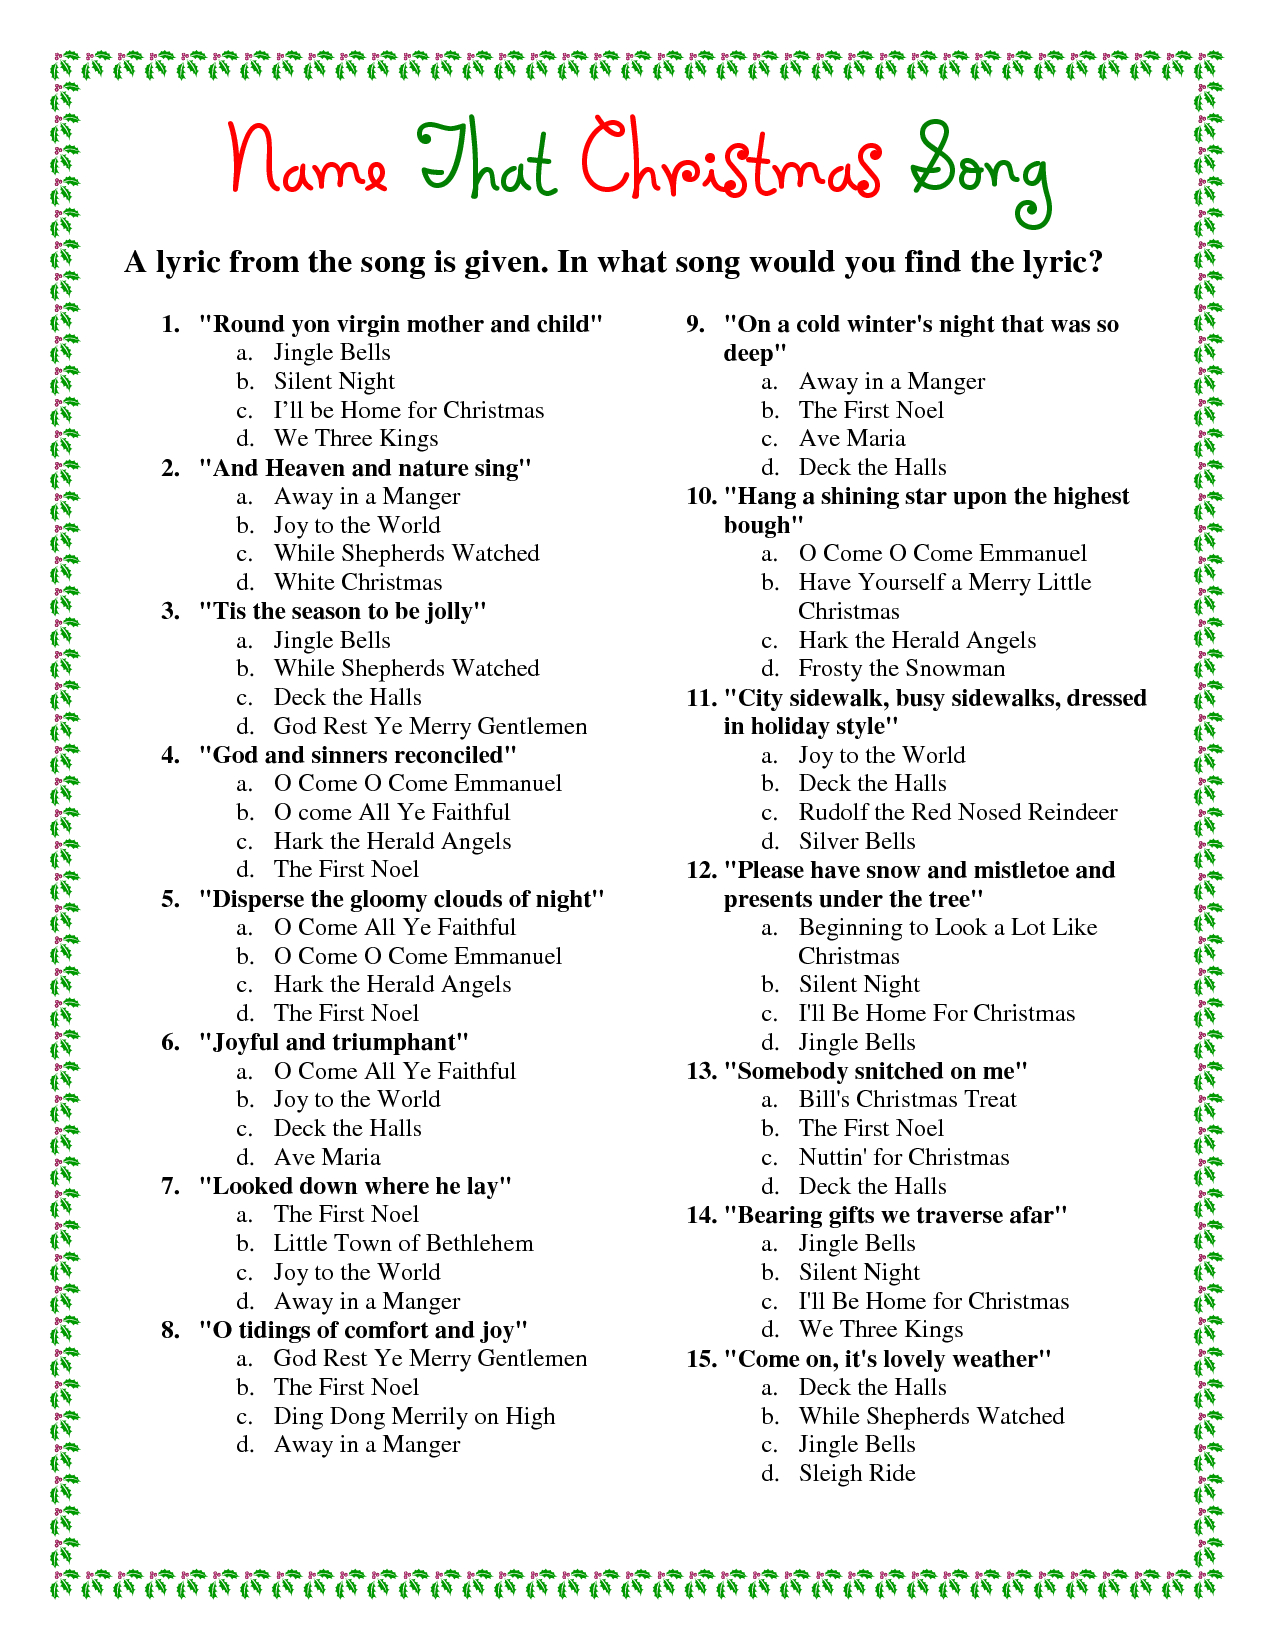 Free Christmas Picture Quiz Questions And Answers Printable | Free Printable A to Z